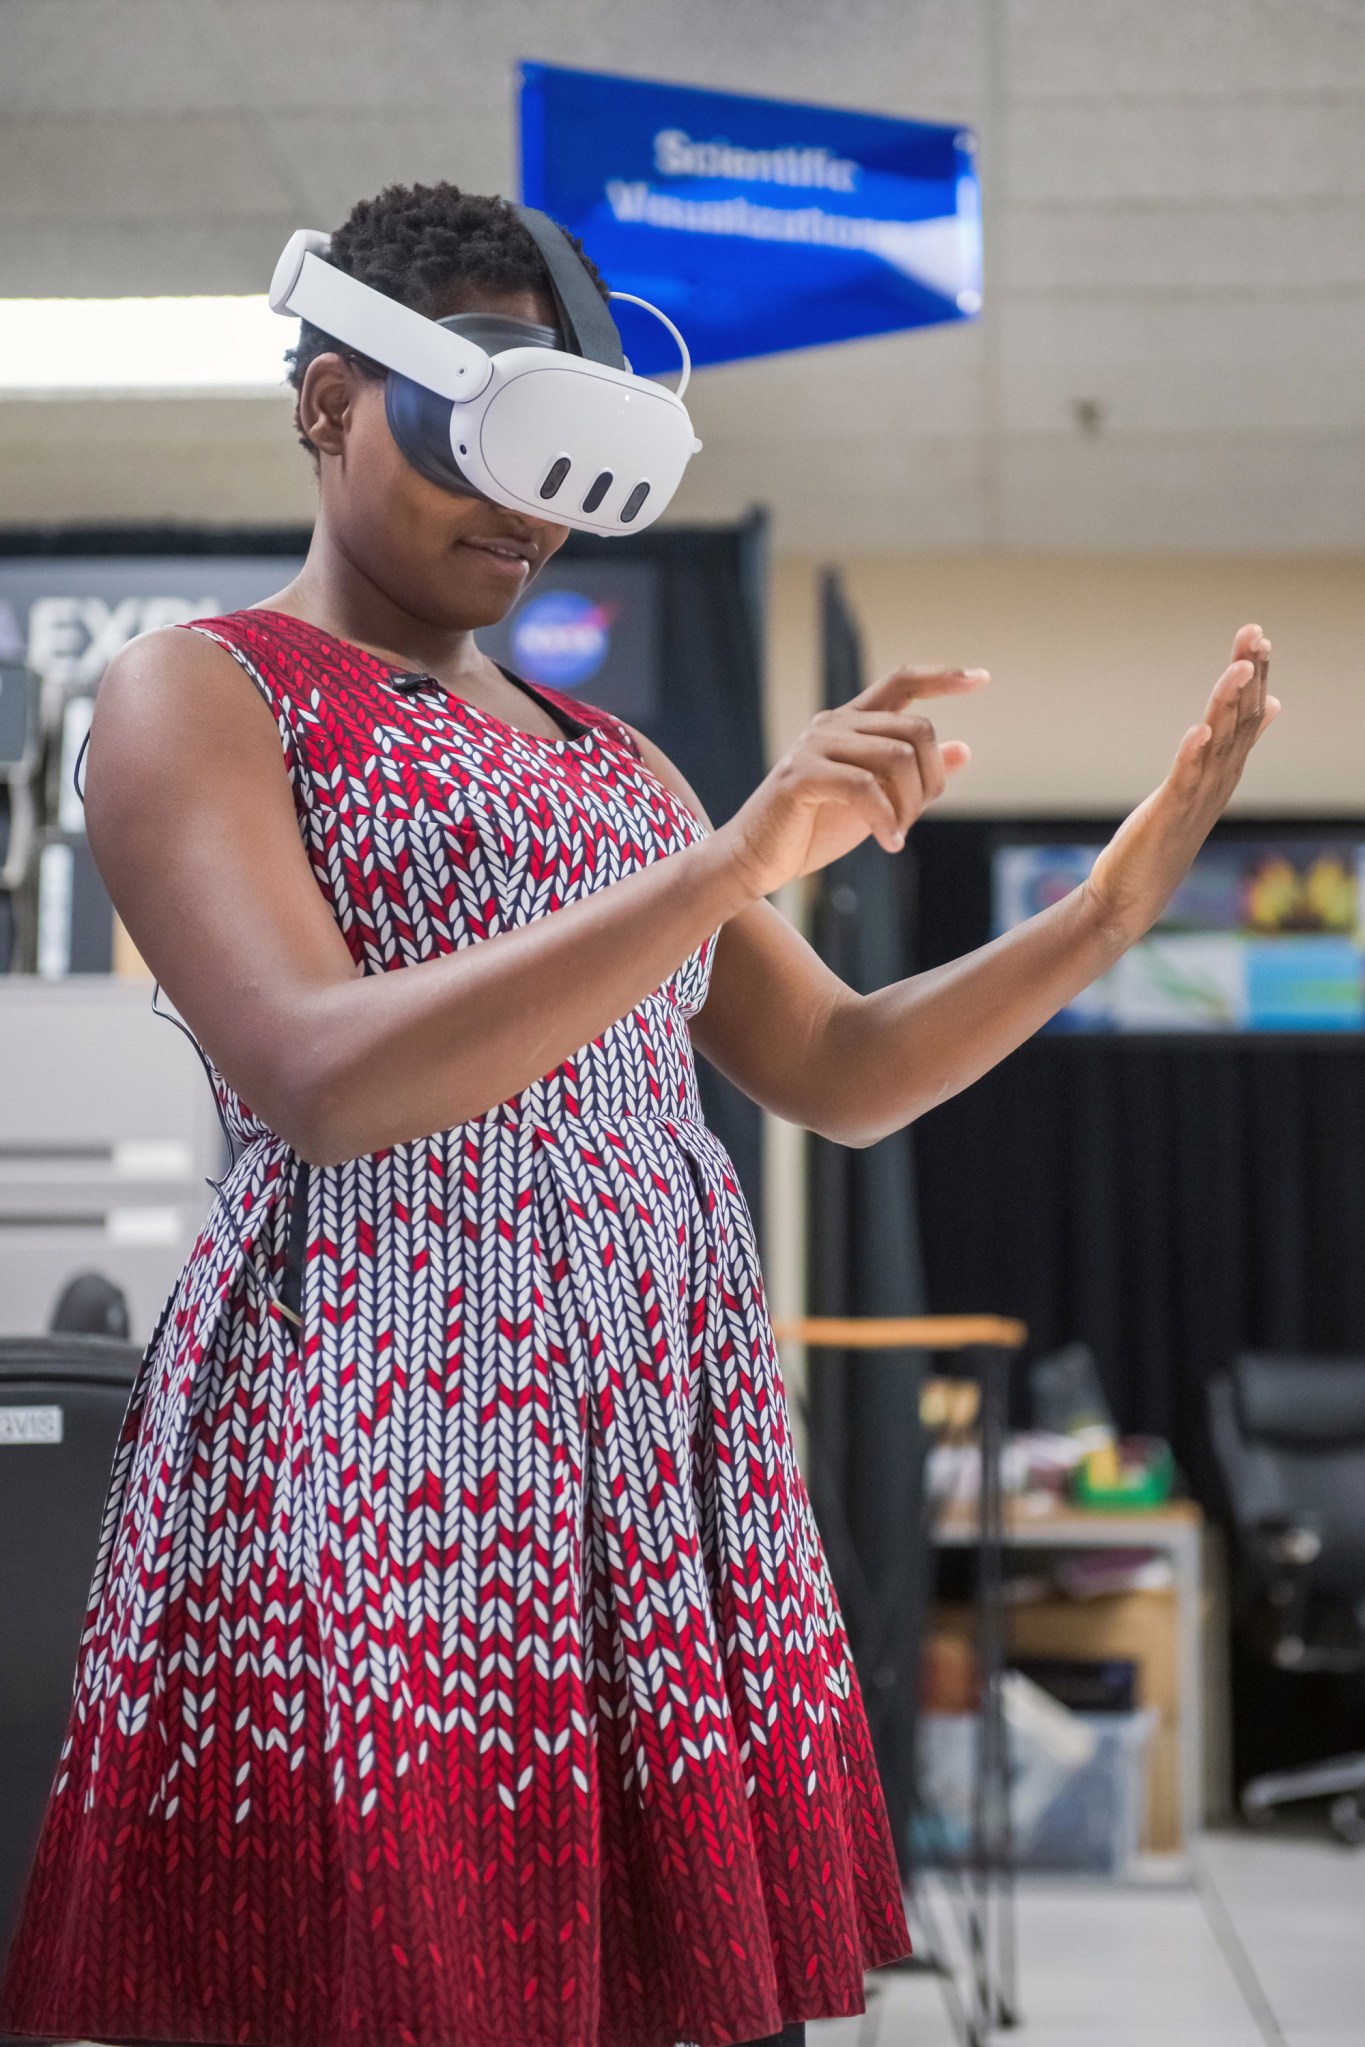 Nelly Cheboi concentrates while testing a virtual reality demonstration. She wears a virtual reality headset and a red and white dress. Her hands appear as if she is pressing buttons on an invisible tablet.